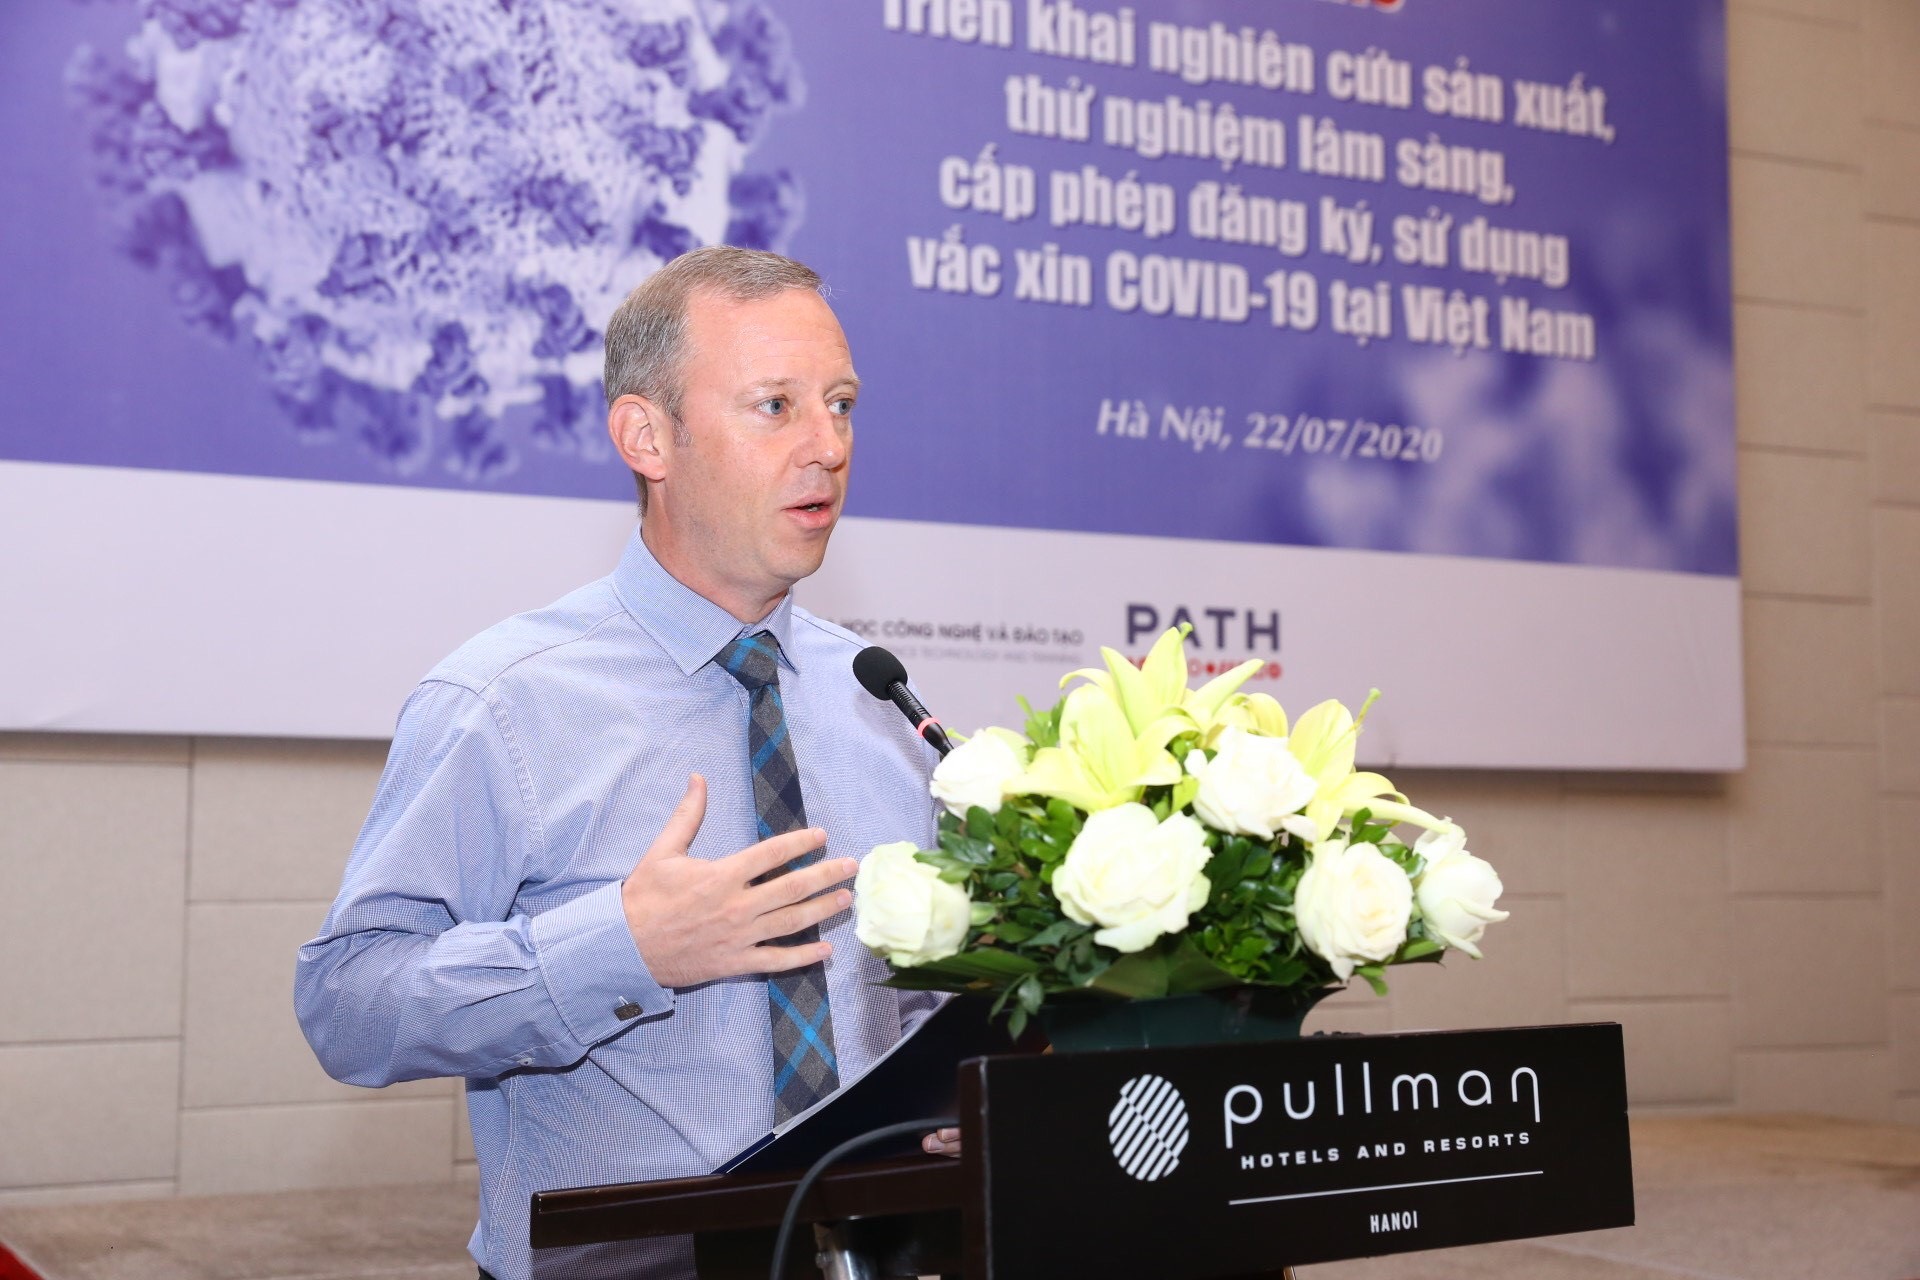 Vietnam, UK working on fair, equitable access to COVID-19 vaccine: diplomat